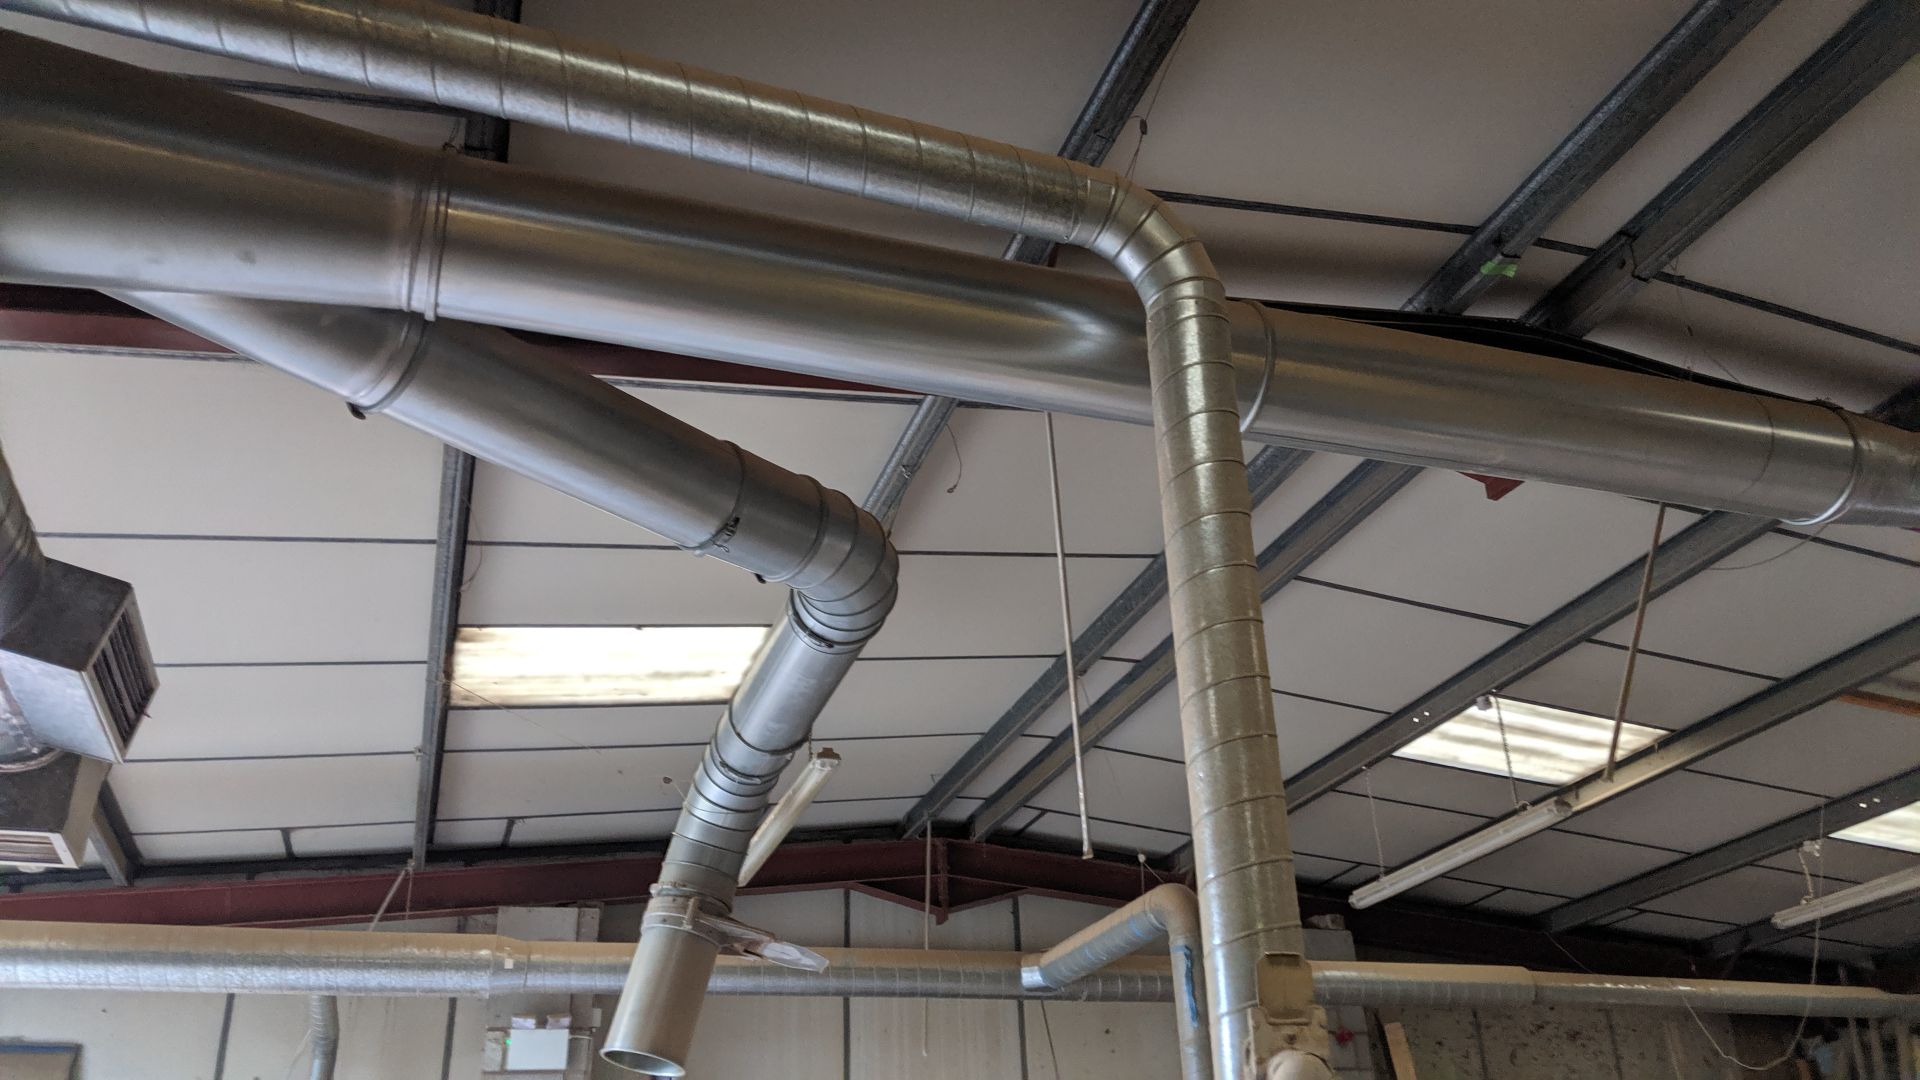 2 off large external dust extractors including ducting attached to each unit, running throughout the - Image 40 of 44